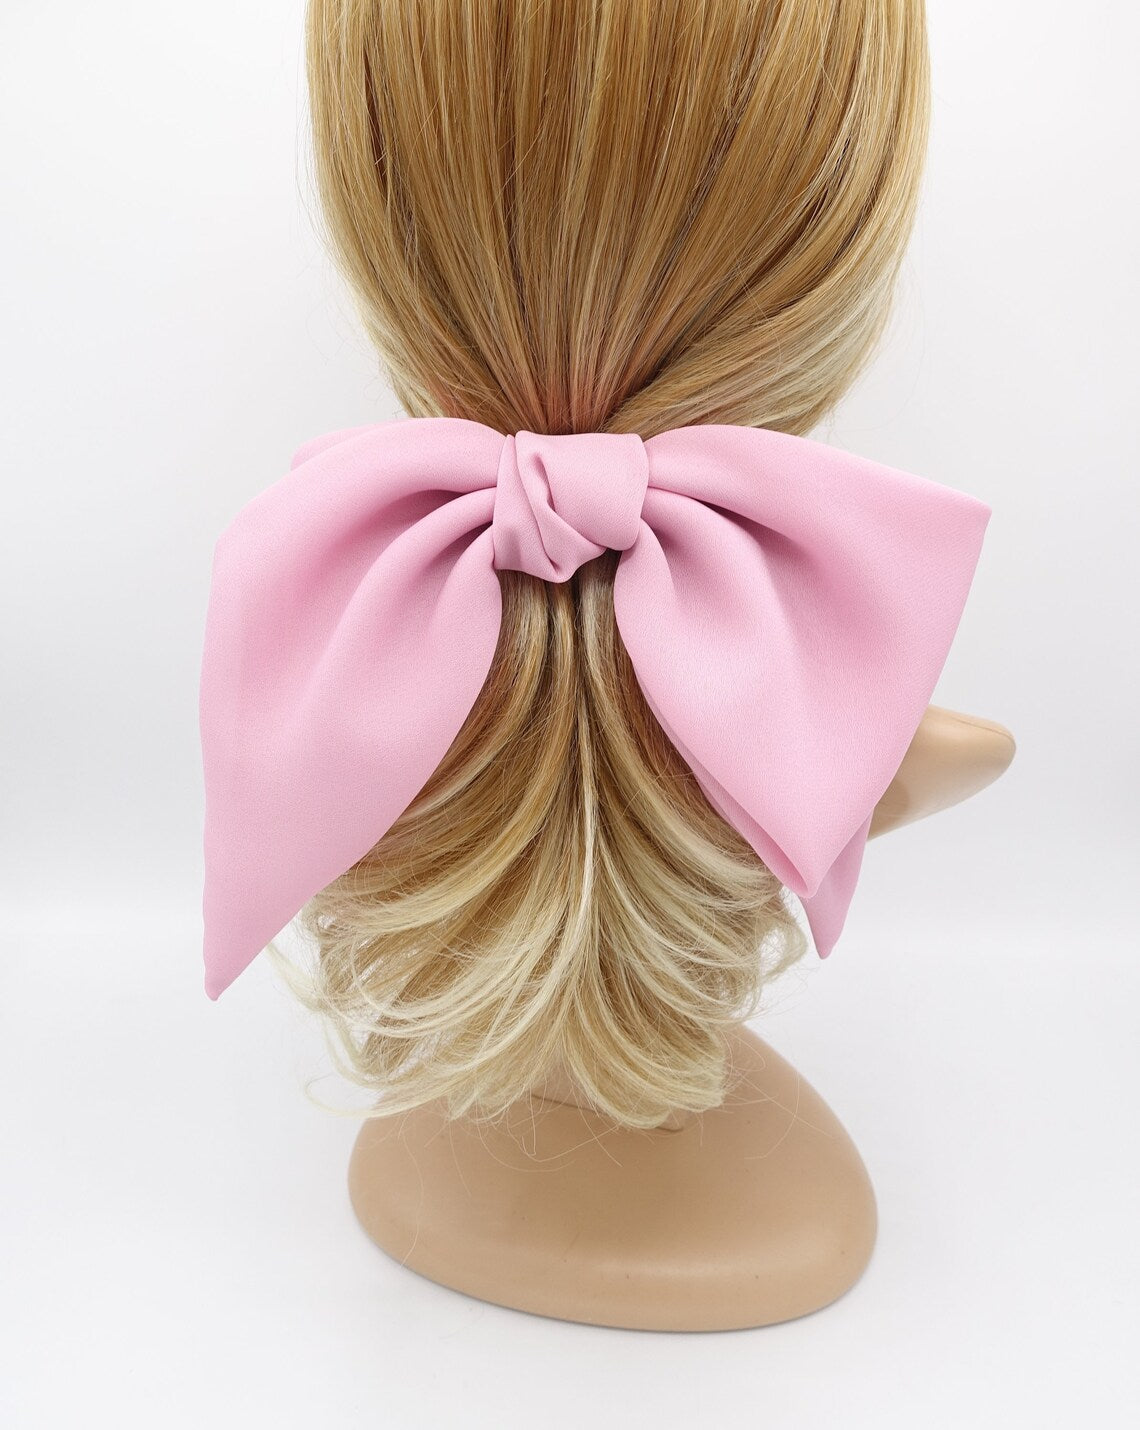 Spring into Style with VeryShines High-Quality Hair Accessories!